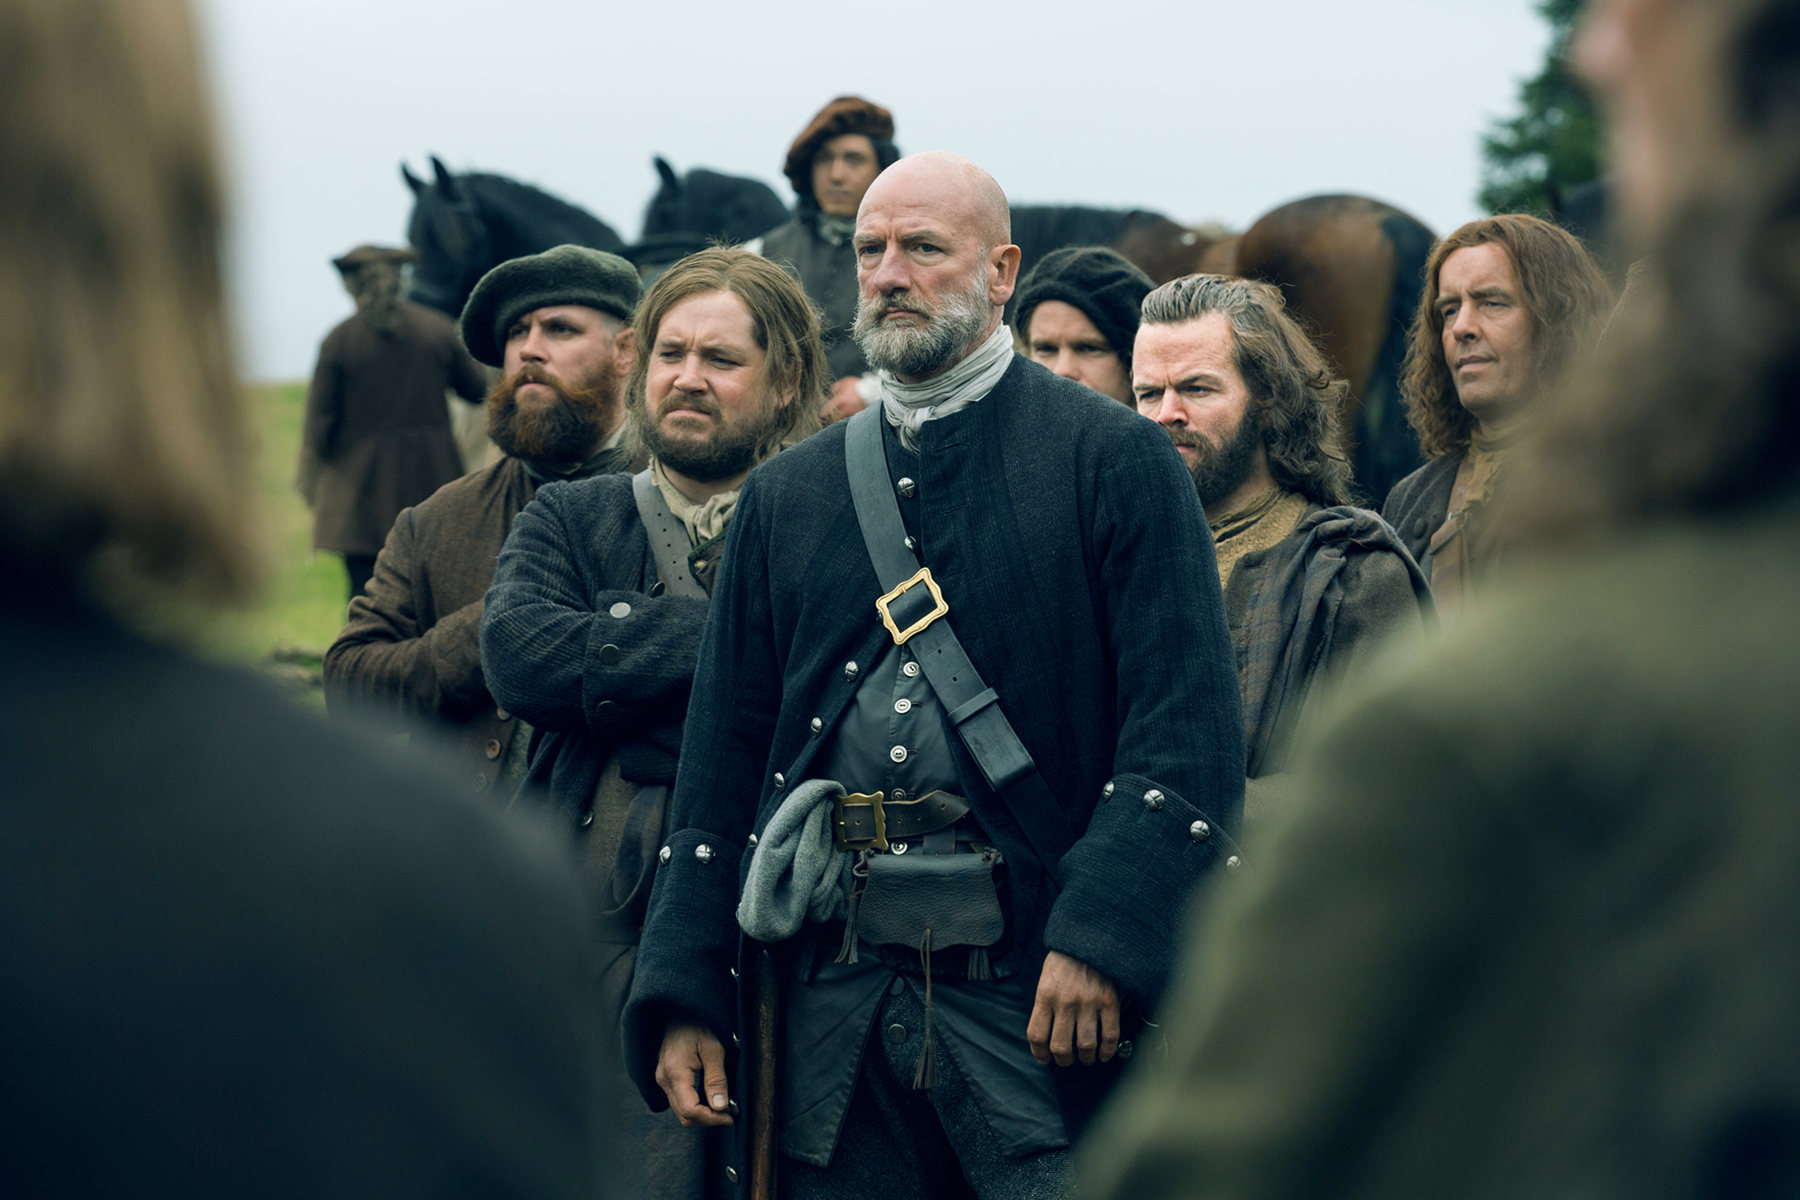 Above center: A man who does not like being told that he doesn't fight correctly. (Left, Grant O'Rourke as Rubert MacKenzie. Center, Graham McTavish as Dougal MacKenzie. Right, Stephen Walters as Angus Mhor.)